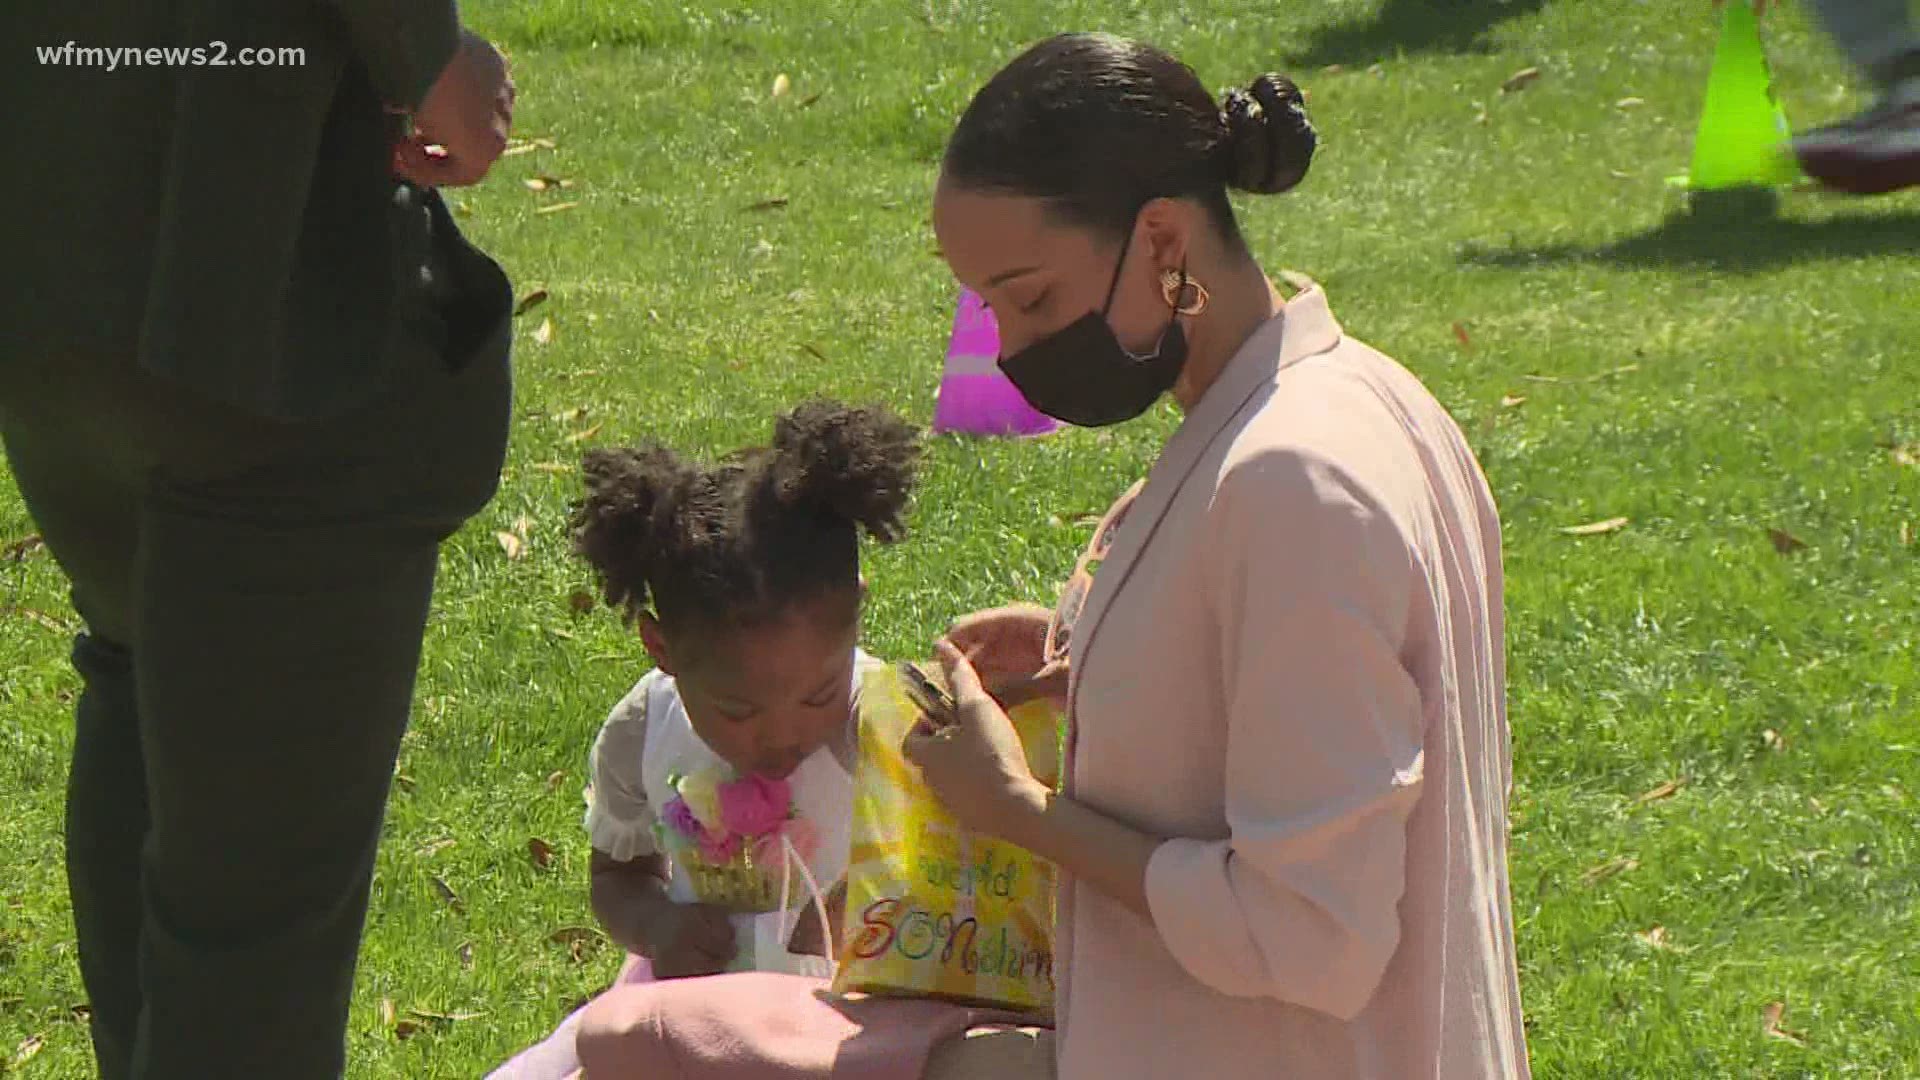 Hungry Church held an Easter service and egg hunt in Greensboro's Central City Park.